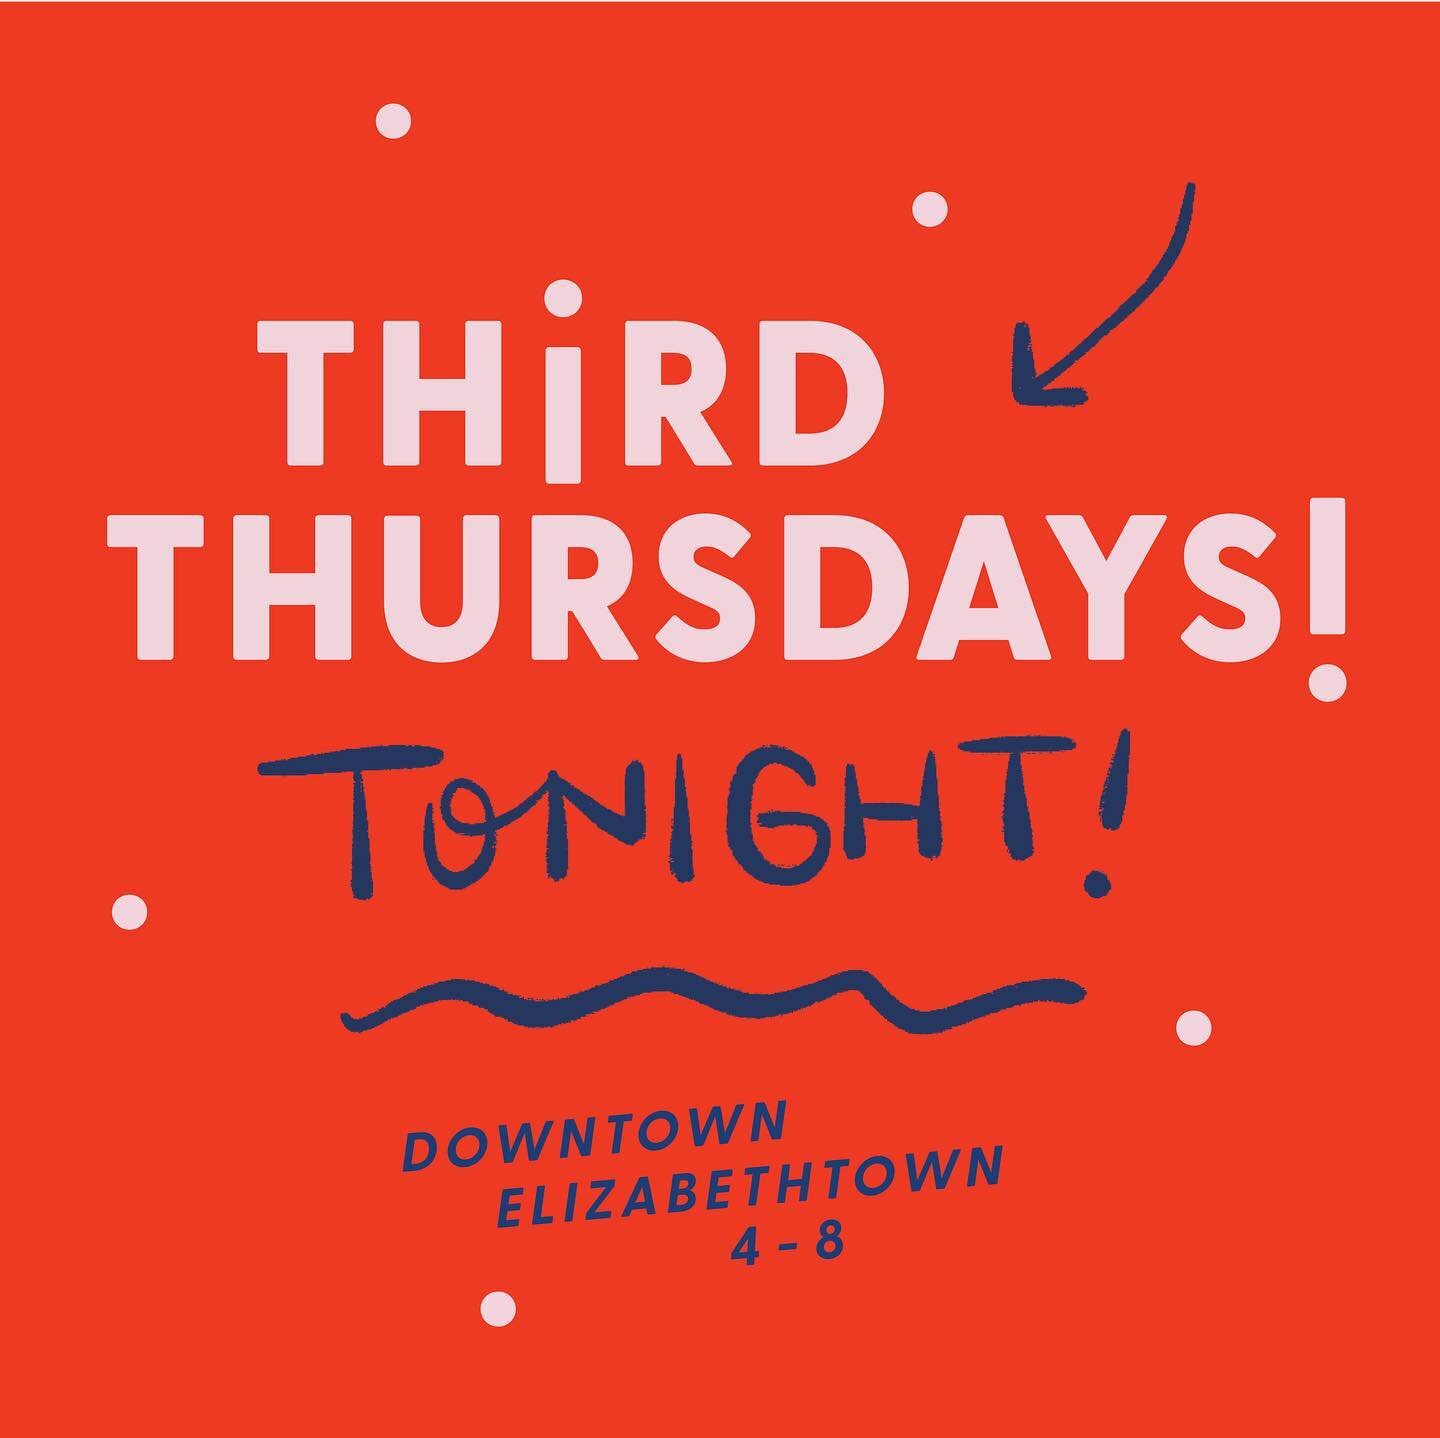 Visit your favorite downtown spots! My neighbors will be open and ready to help you celebrate the first of many fun Third Thursdays! I&rsquo;m sadly having to miss the kickoff, but will be here with an open door for our June event. Have fun and thank